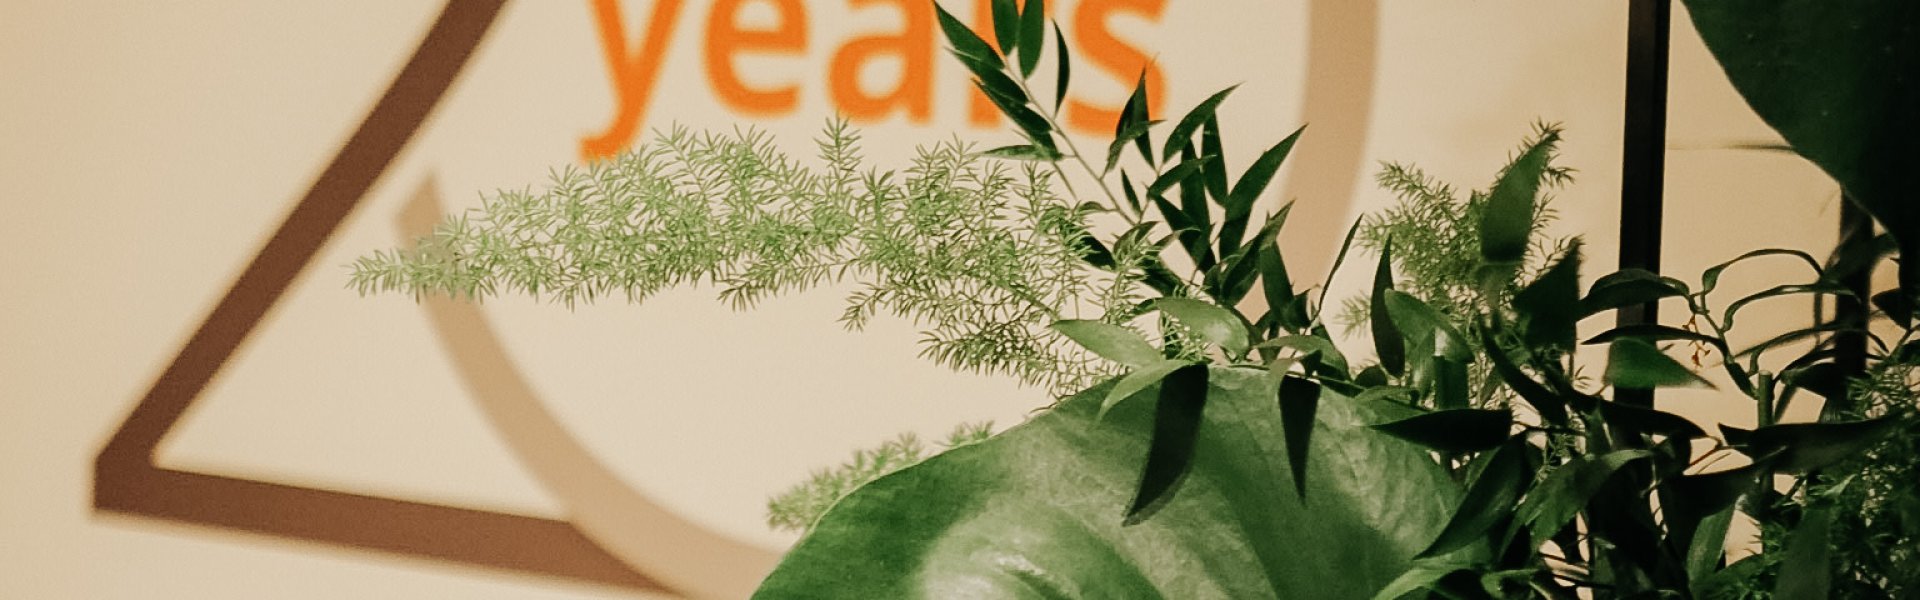 Greenery Wall Business Event Decor 